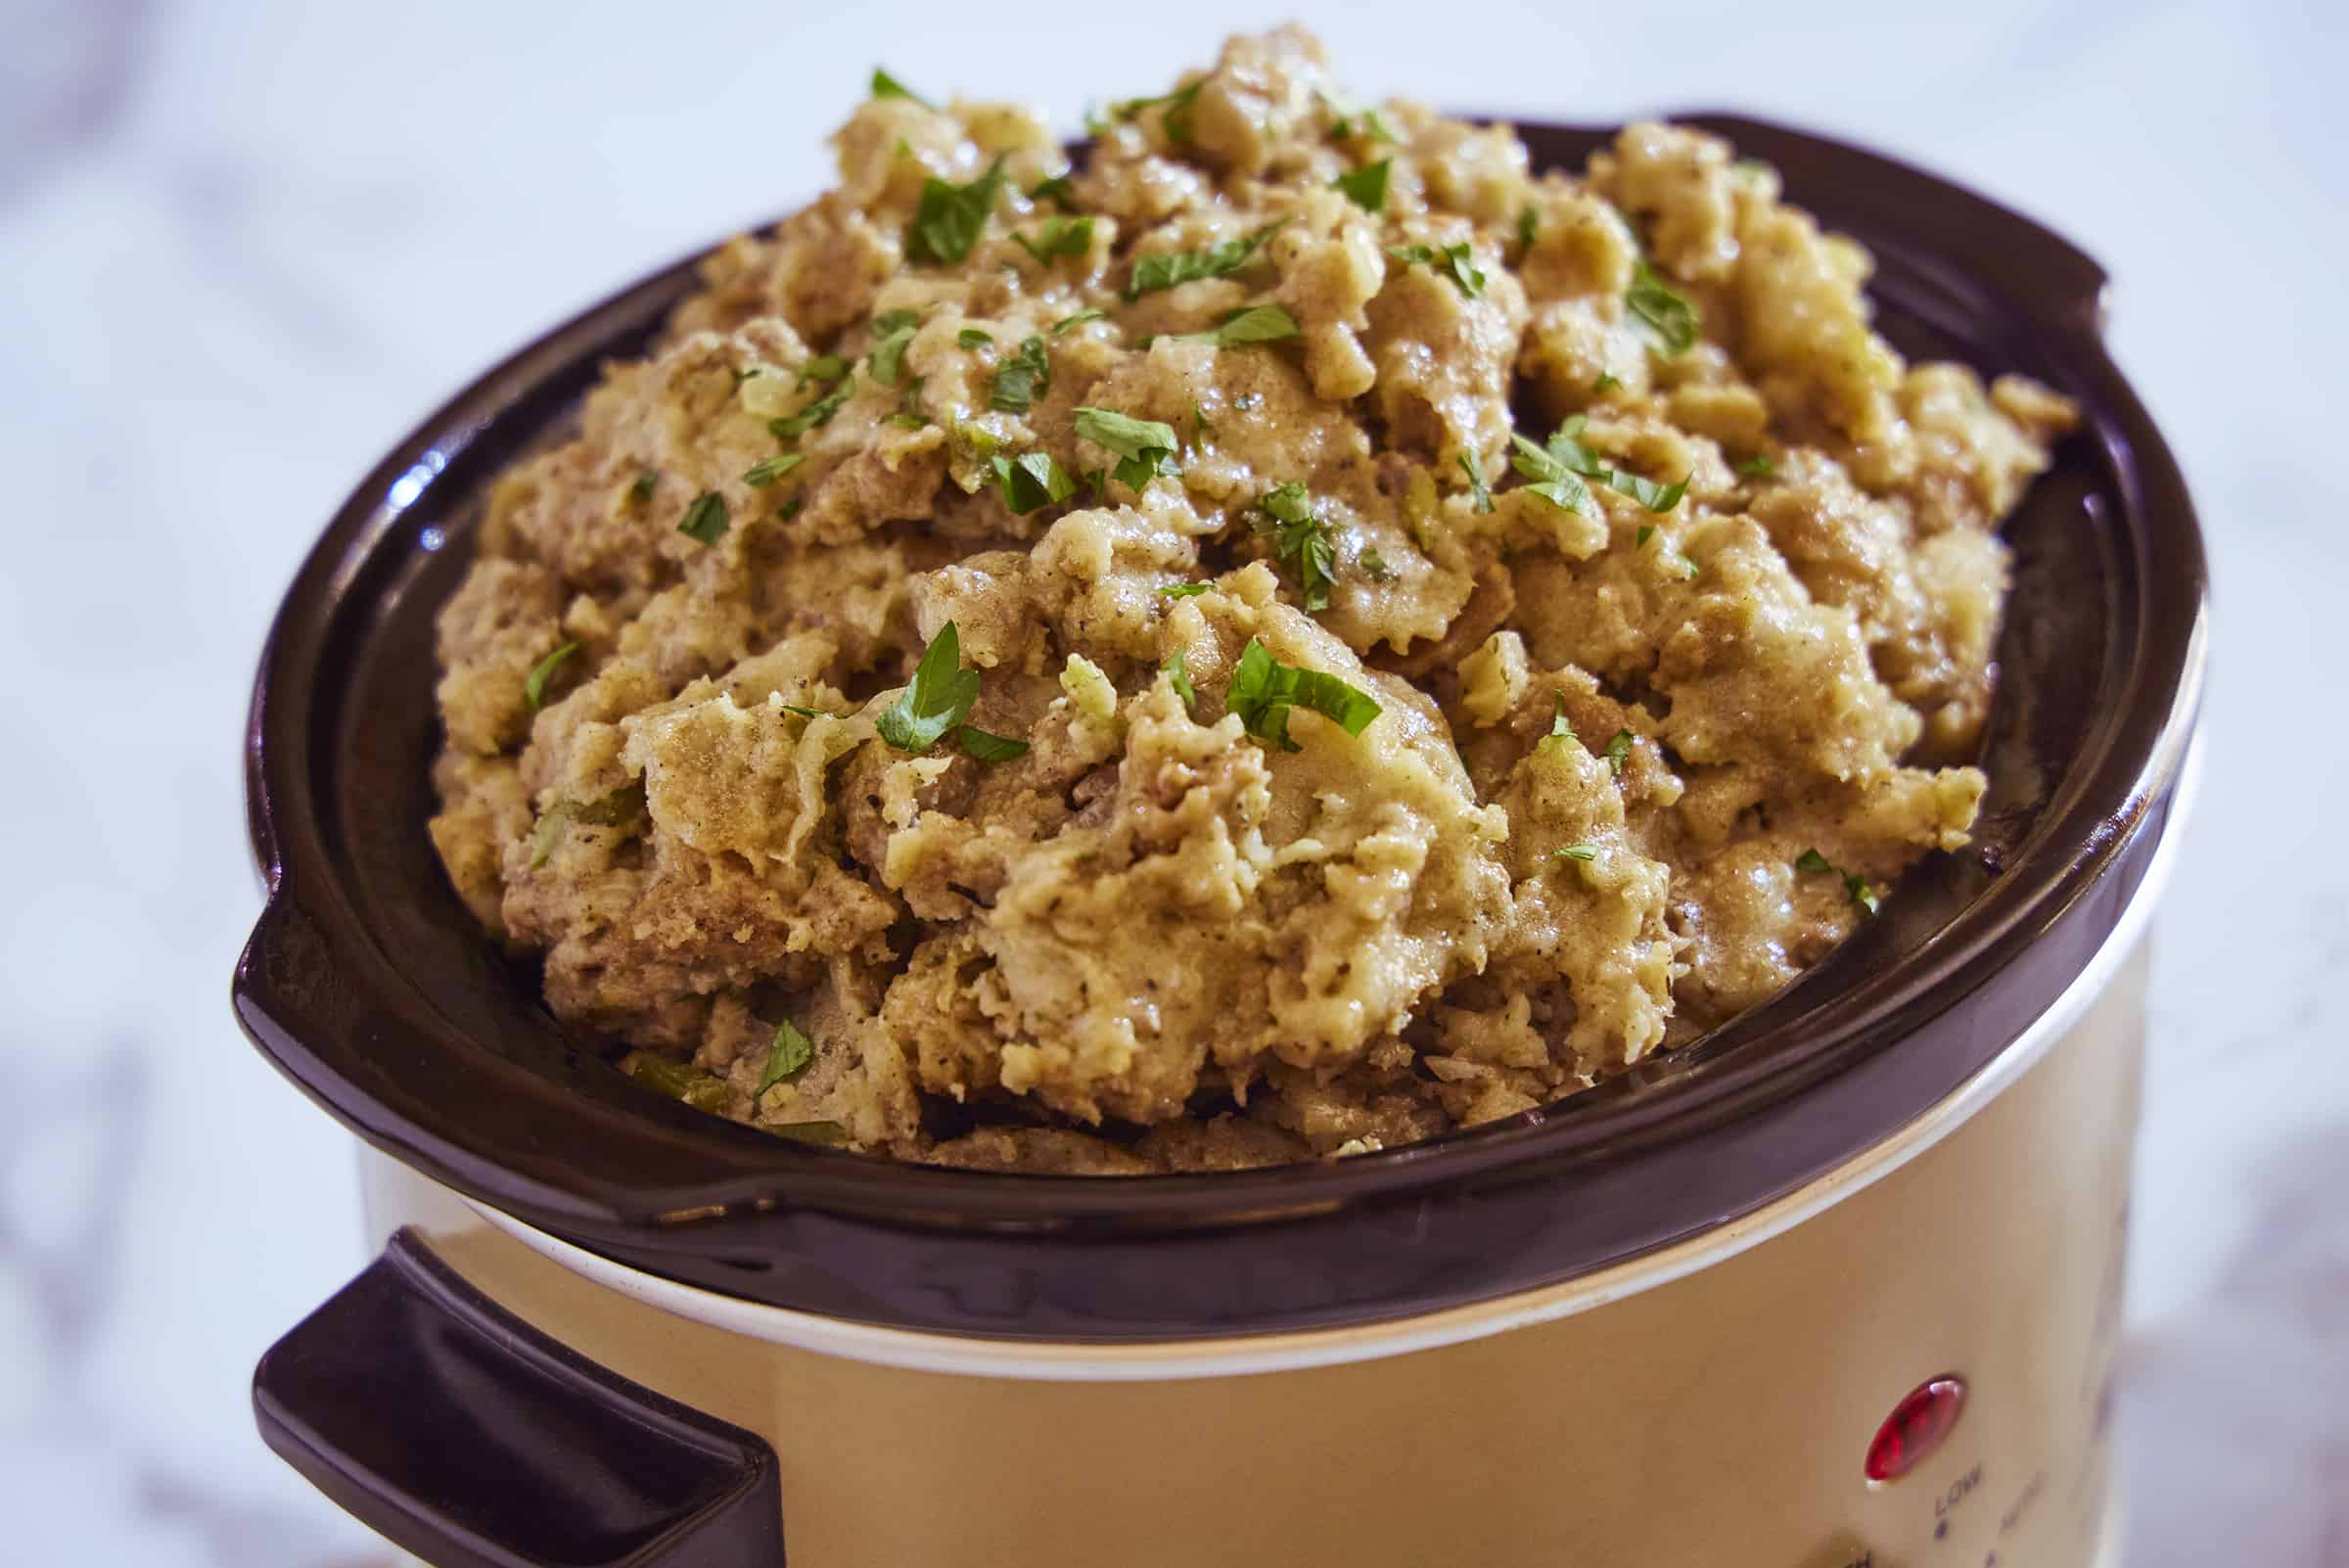 https://www.thecookingmom.com/wp-content/uploads/2019/11/Slow-Cooker-Stuffing.jpg